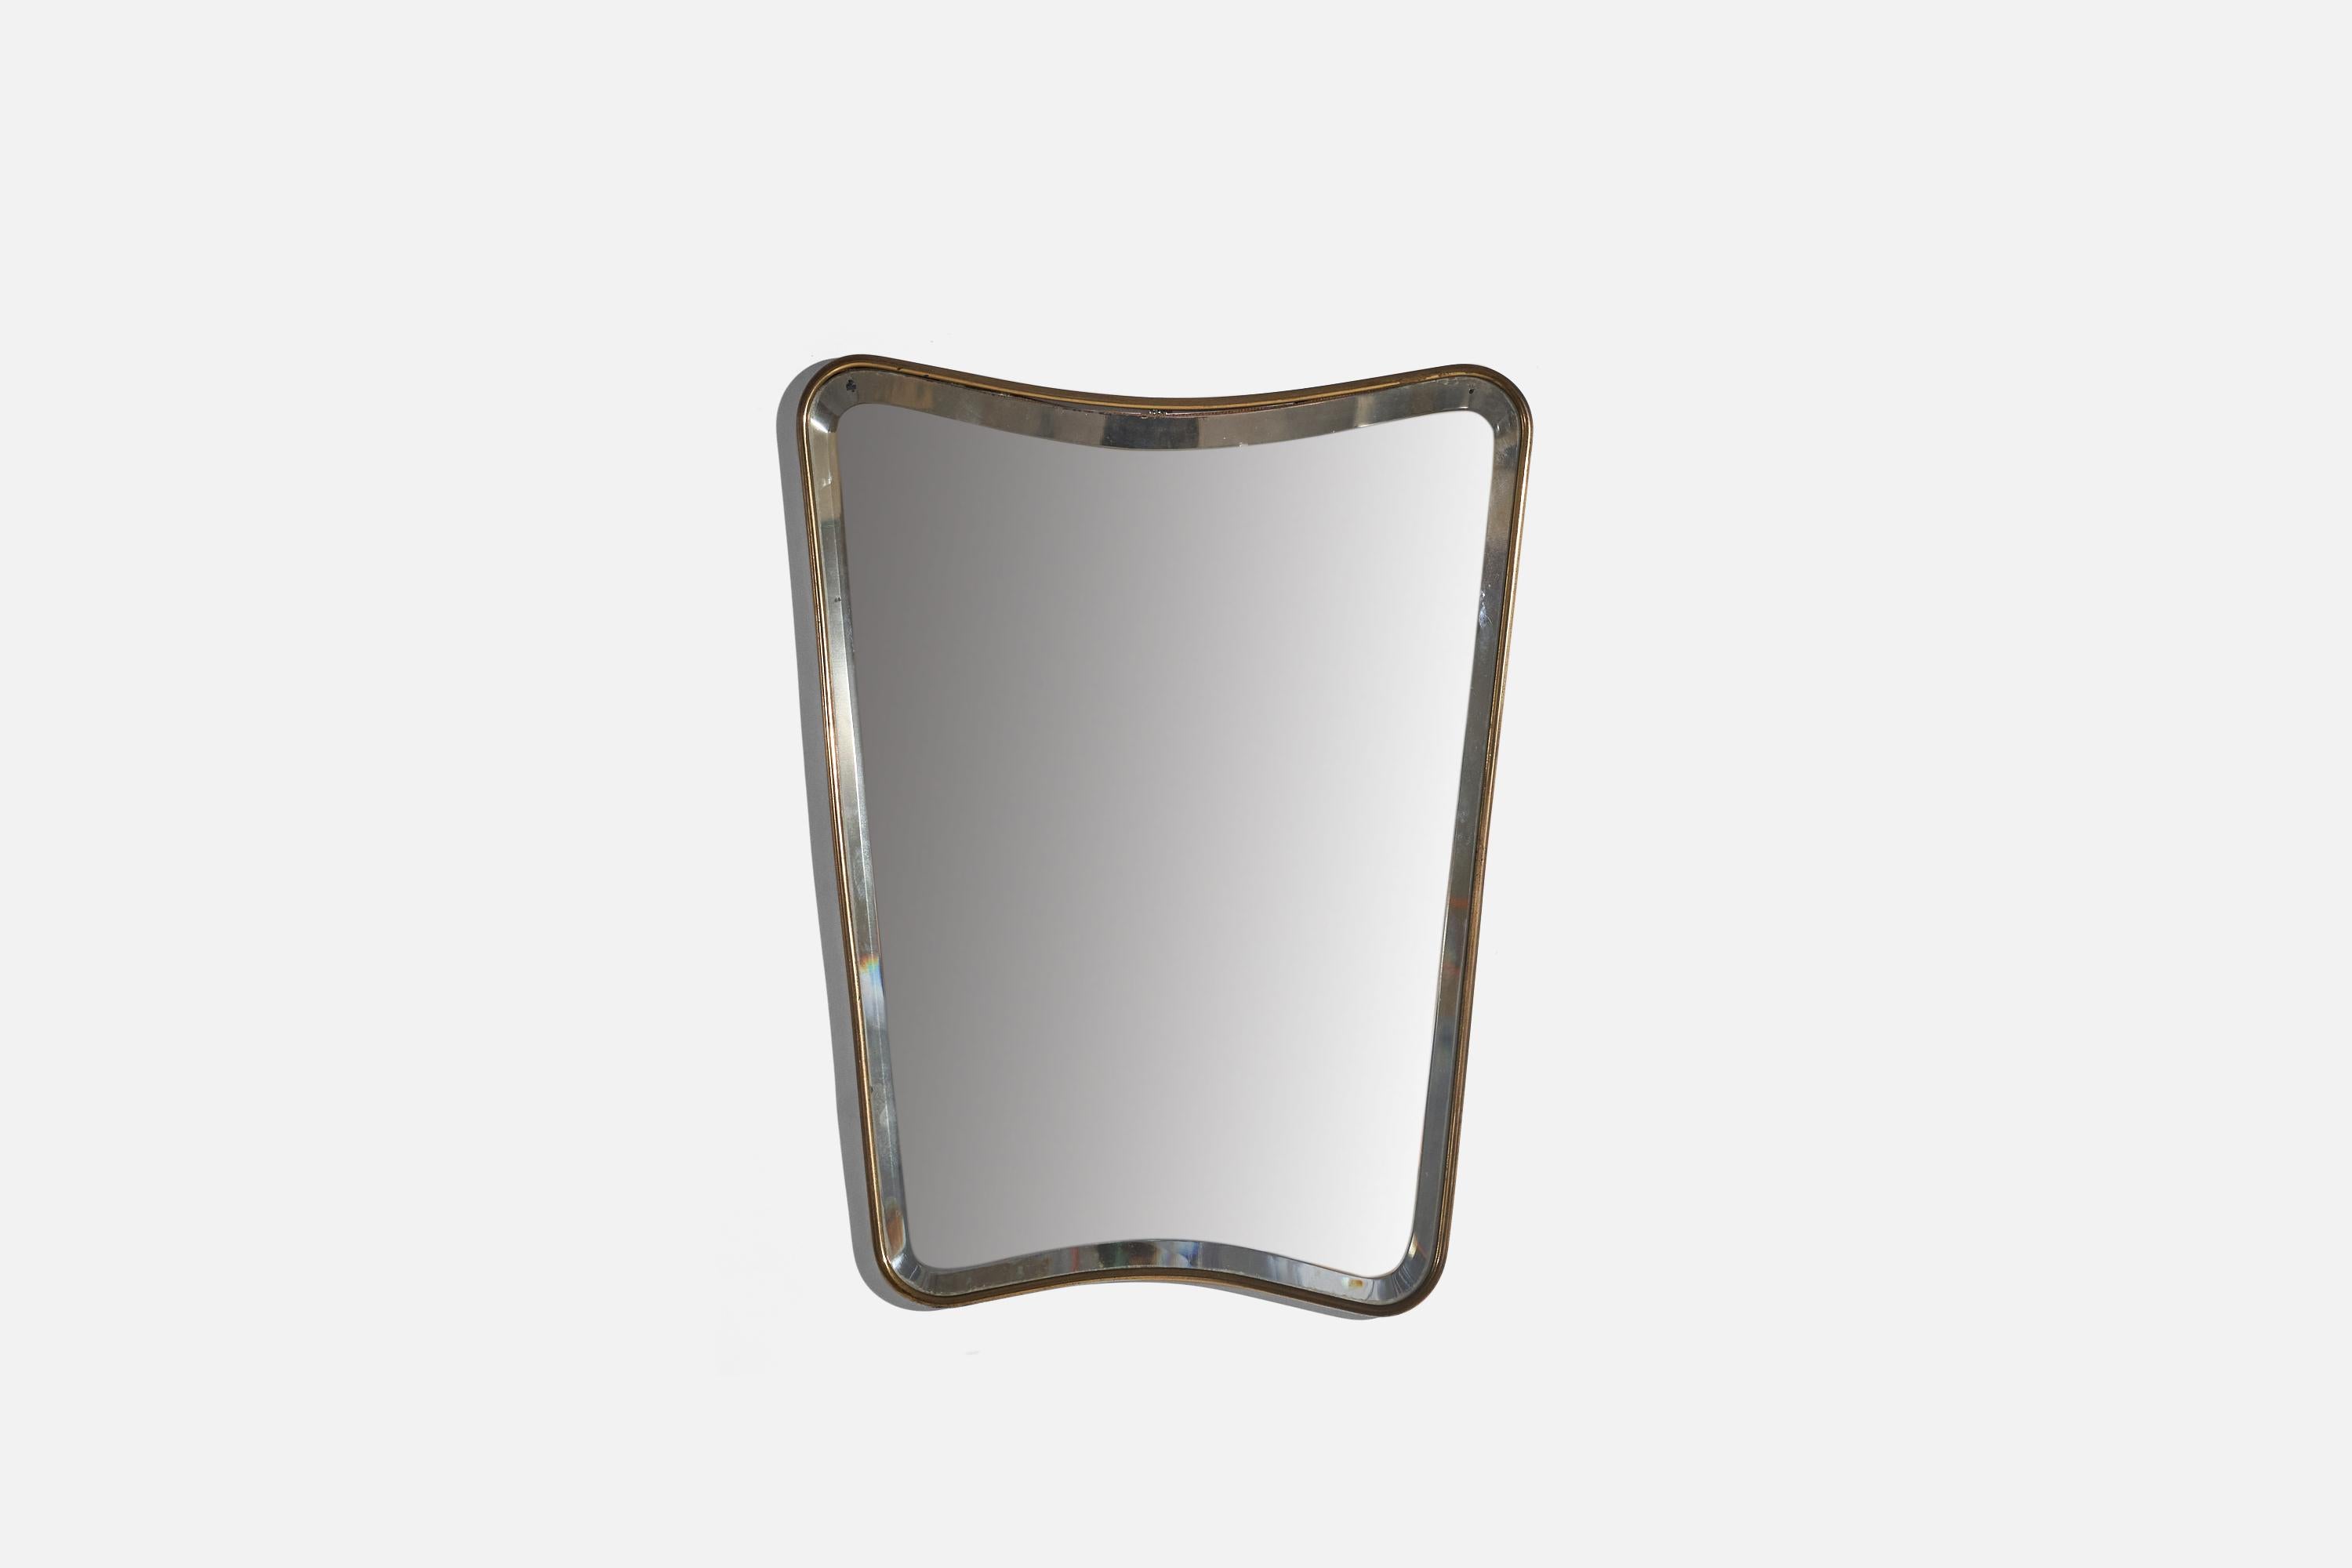 A beveled glass brass wall mirror designed and produced in Italy, c. 1940s.
 